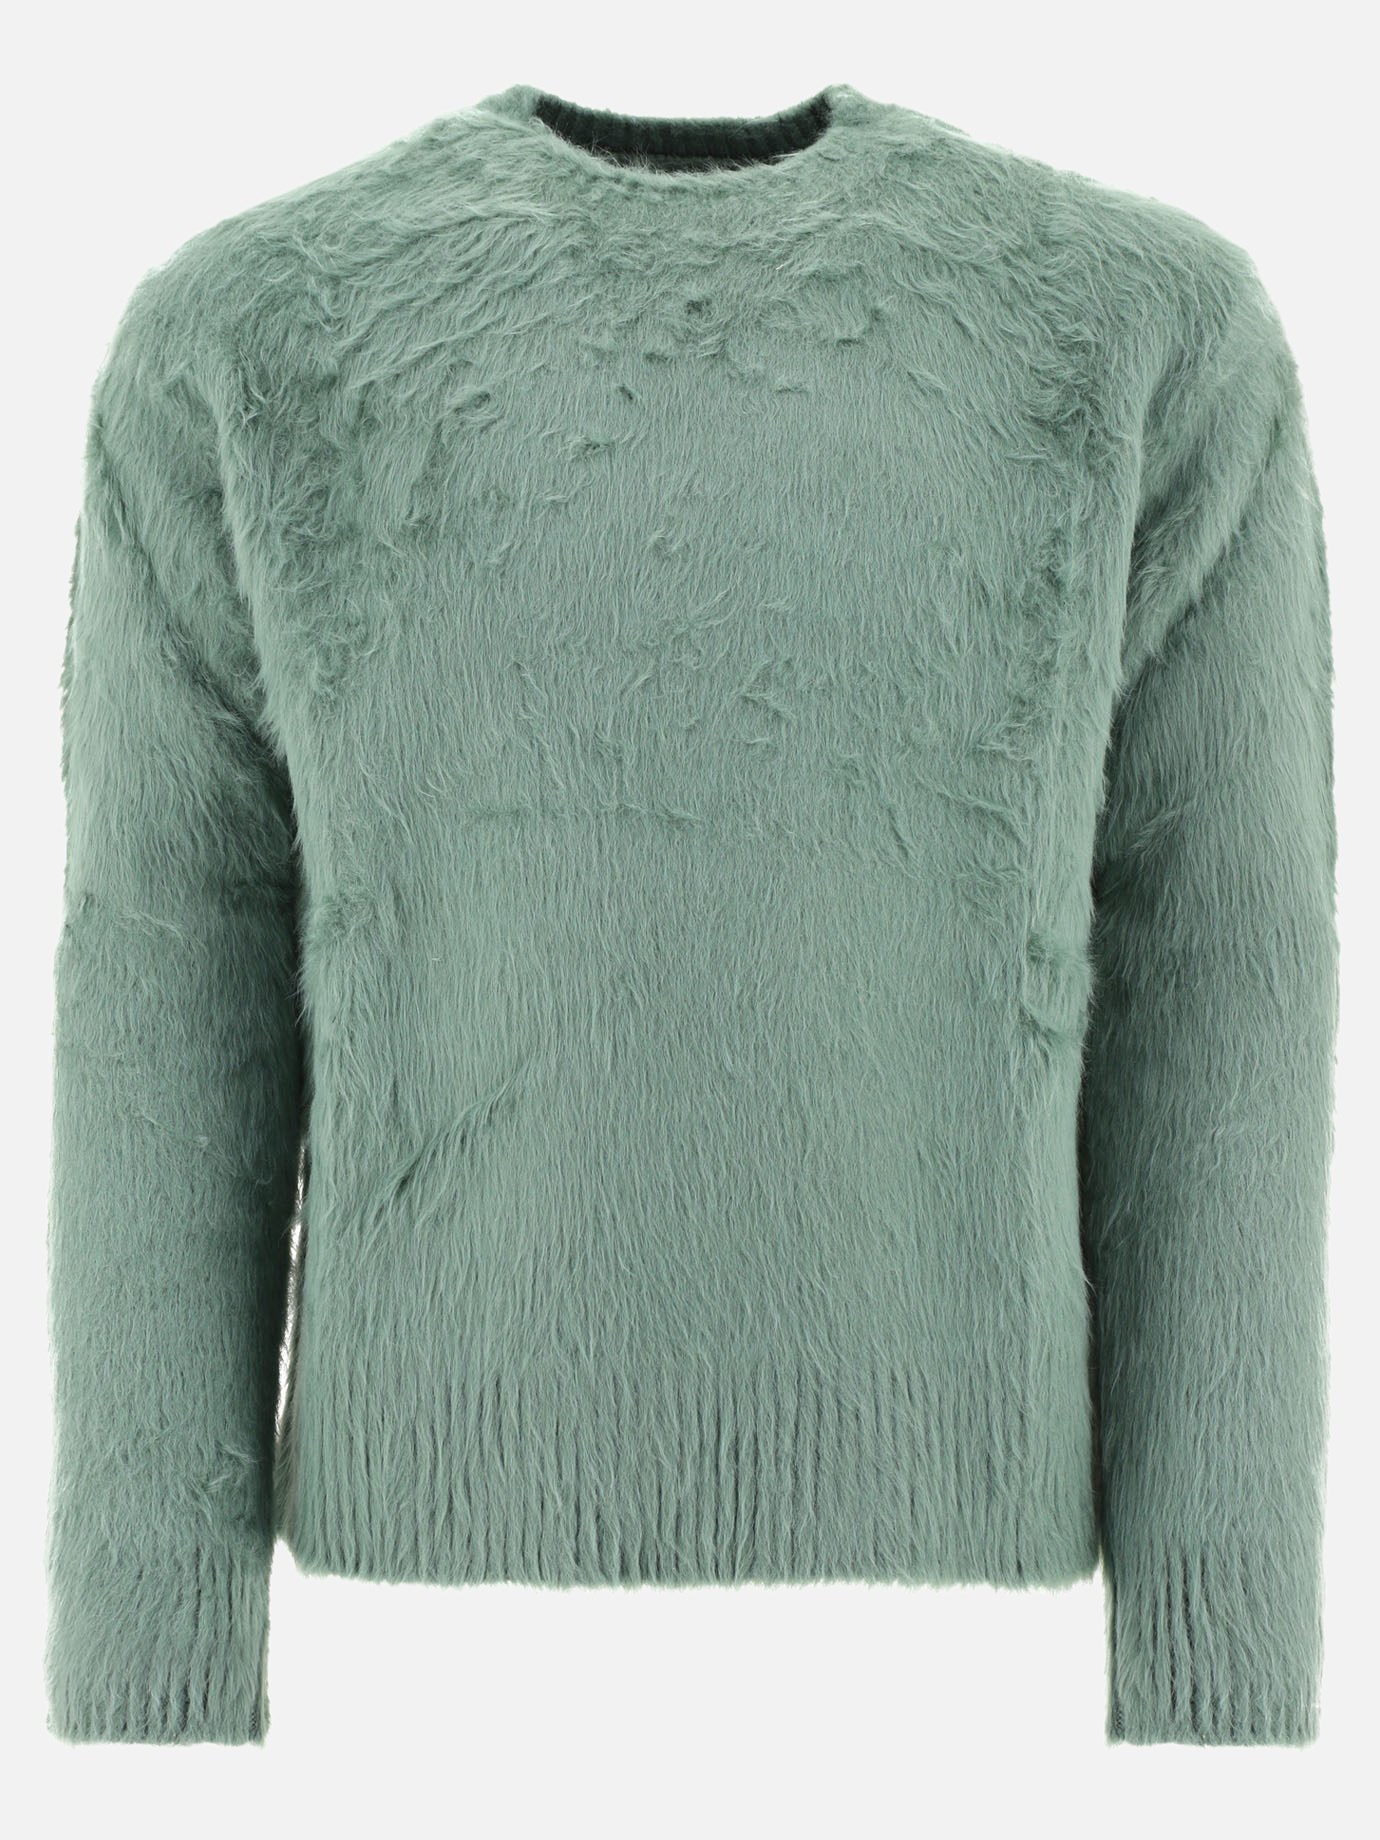 Sweater featuring ribbed hem and cuffs by Jil Sander - 0